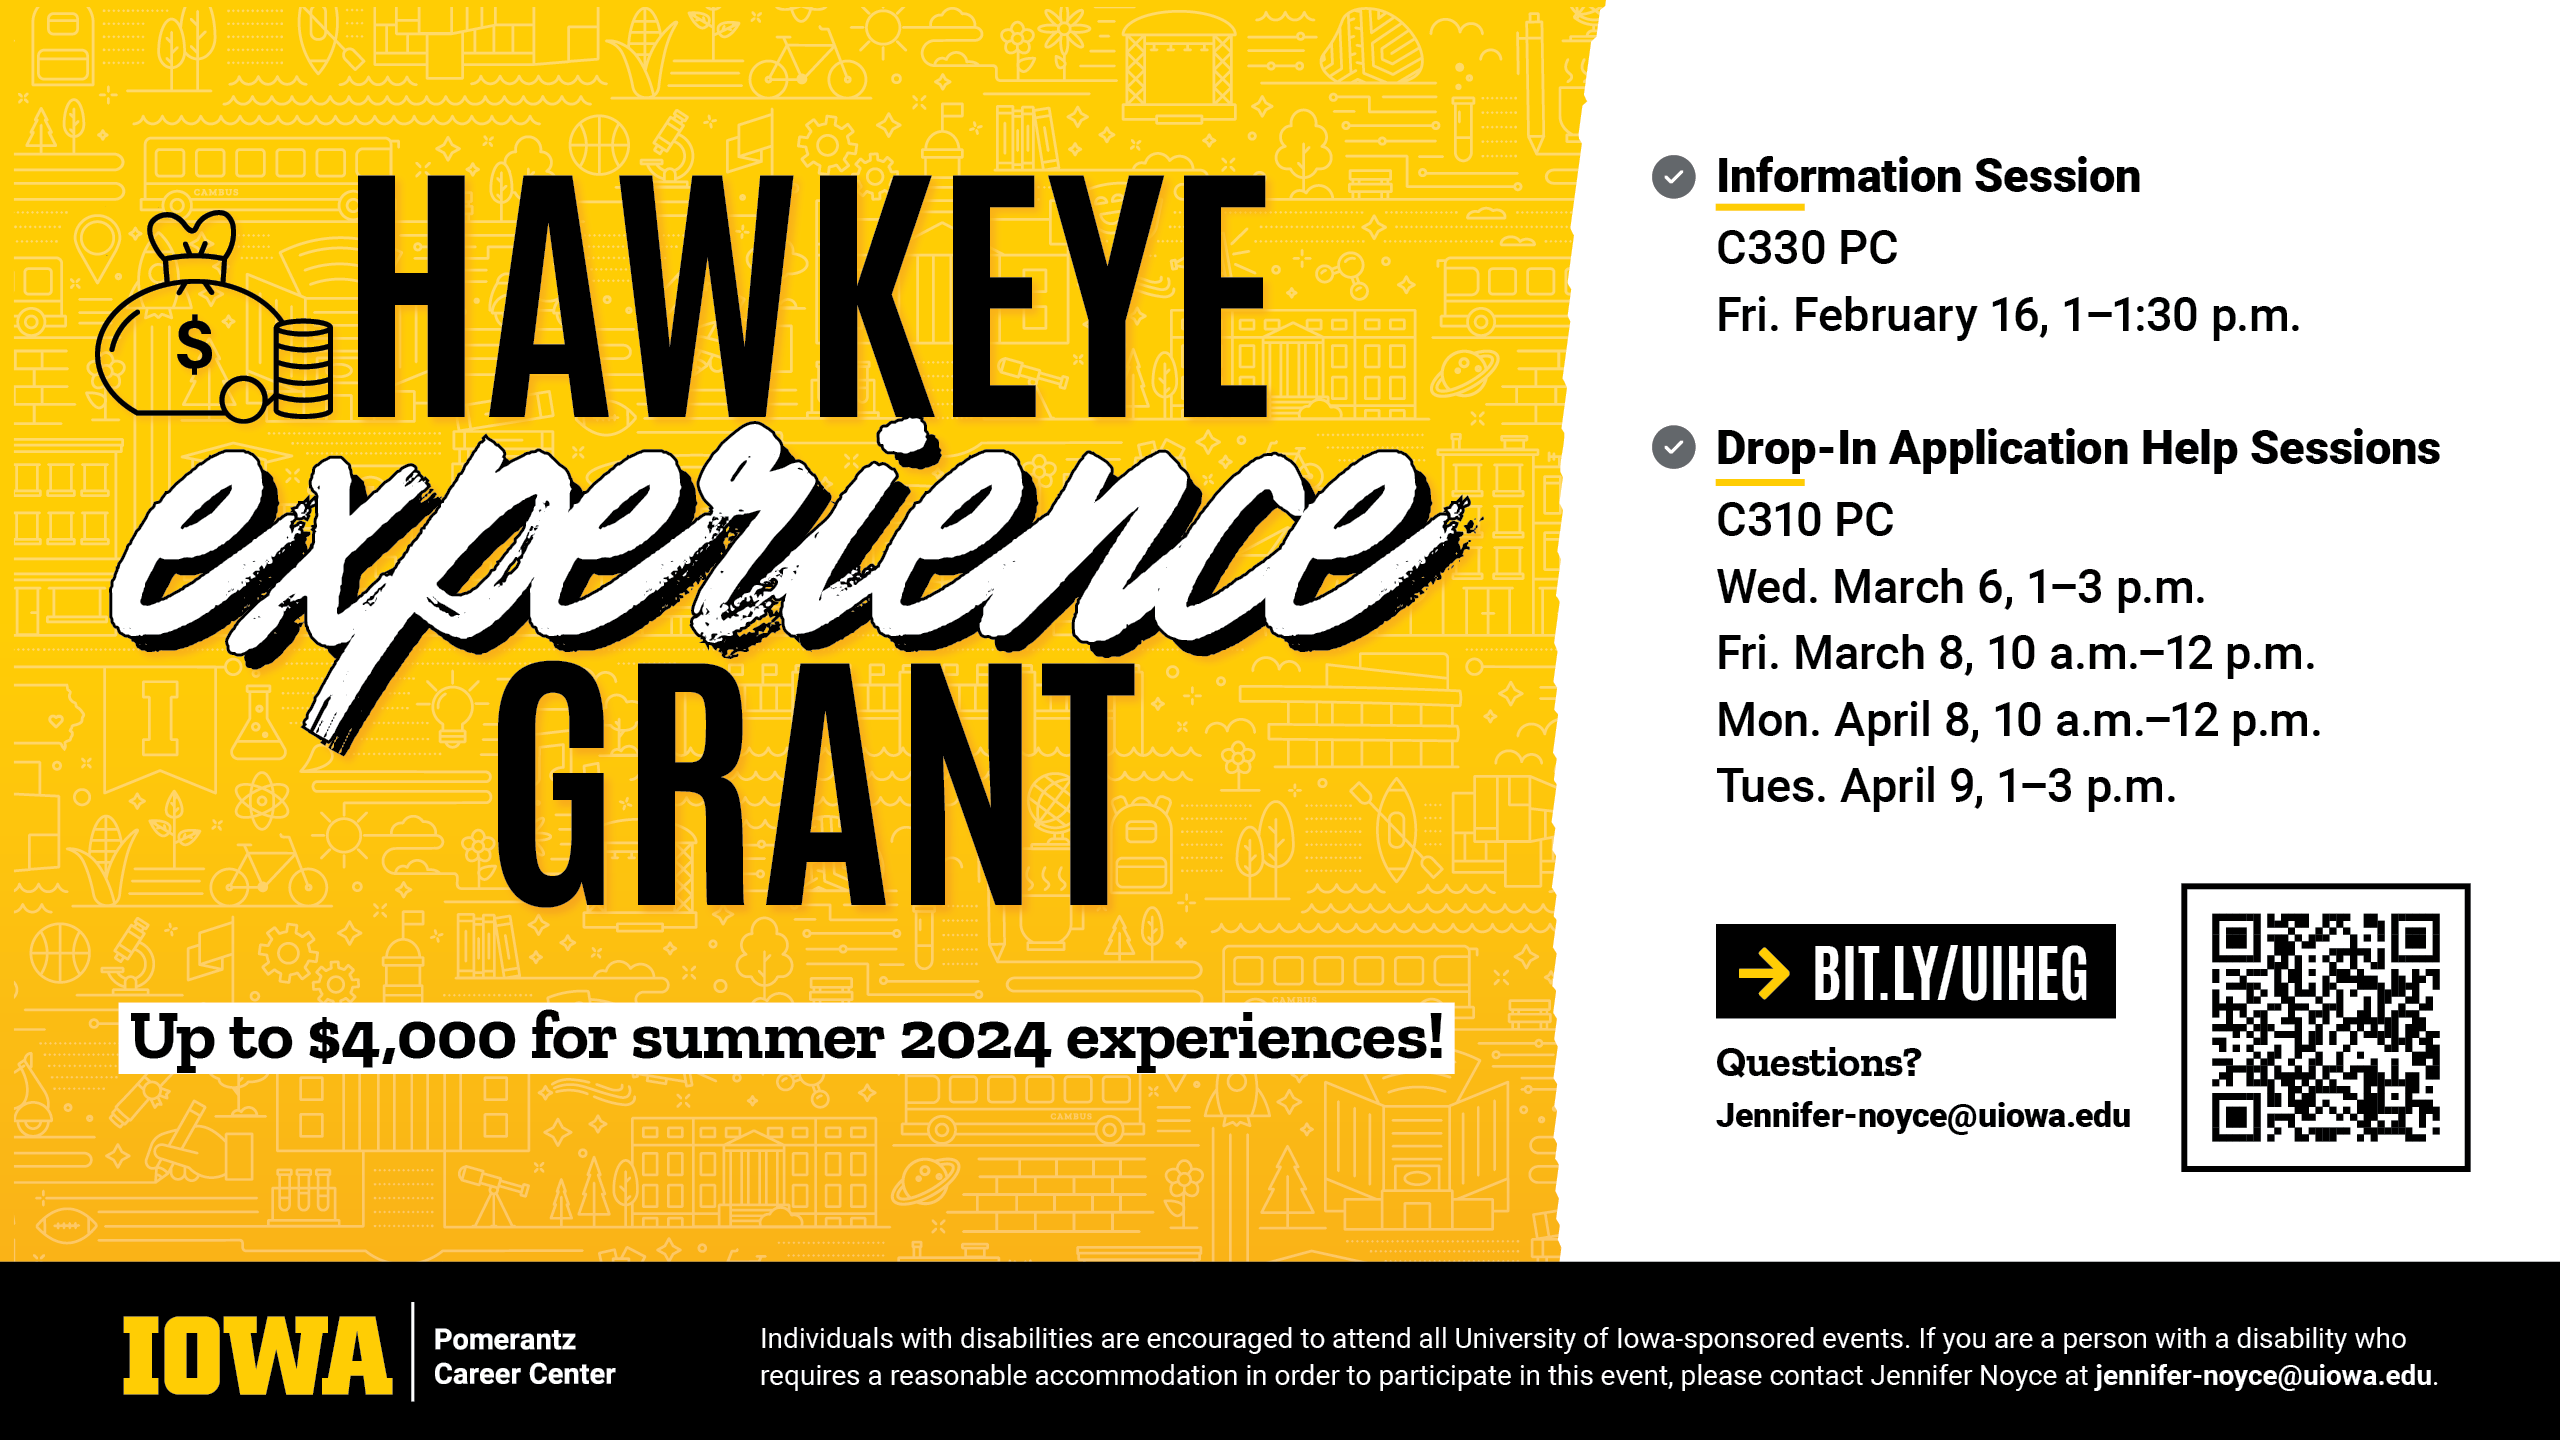 Hawkeye Experience Grant Summer 2024 - Info & Help Sessions